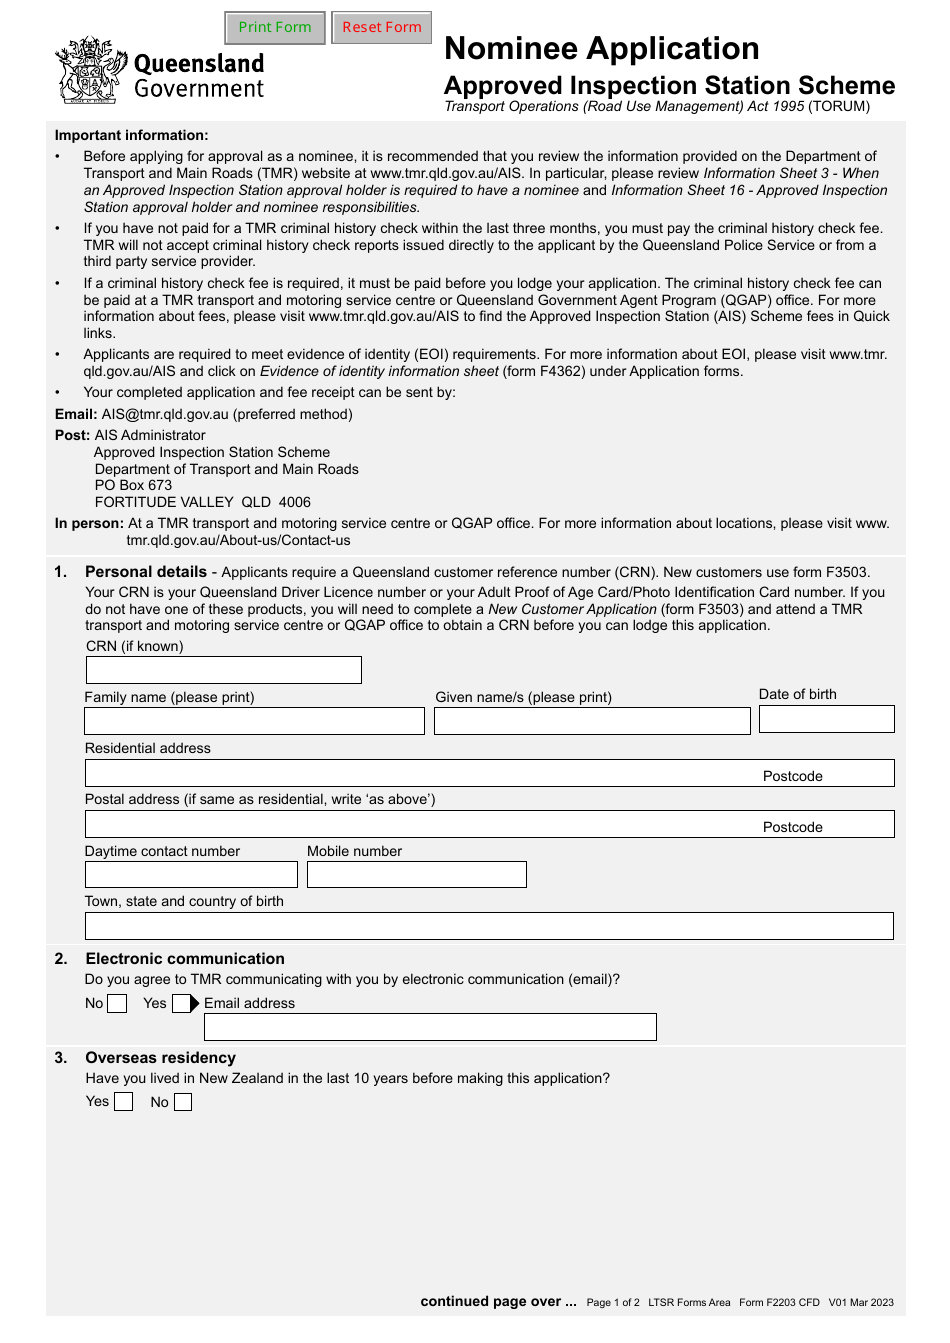 Form F2203 Nominee Application - Approved Inspection Station Scheme - Queensland, Australia, Page 1